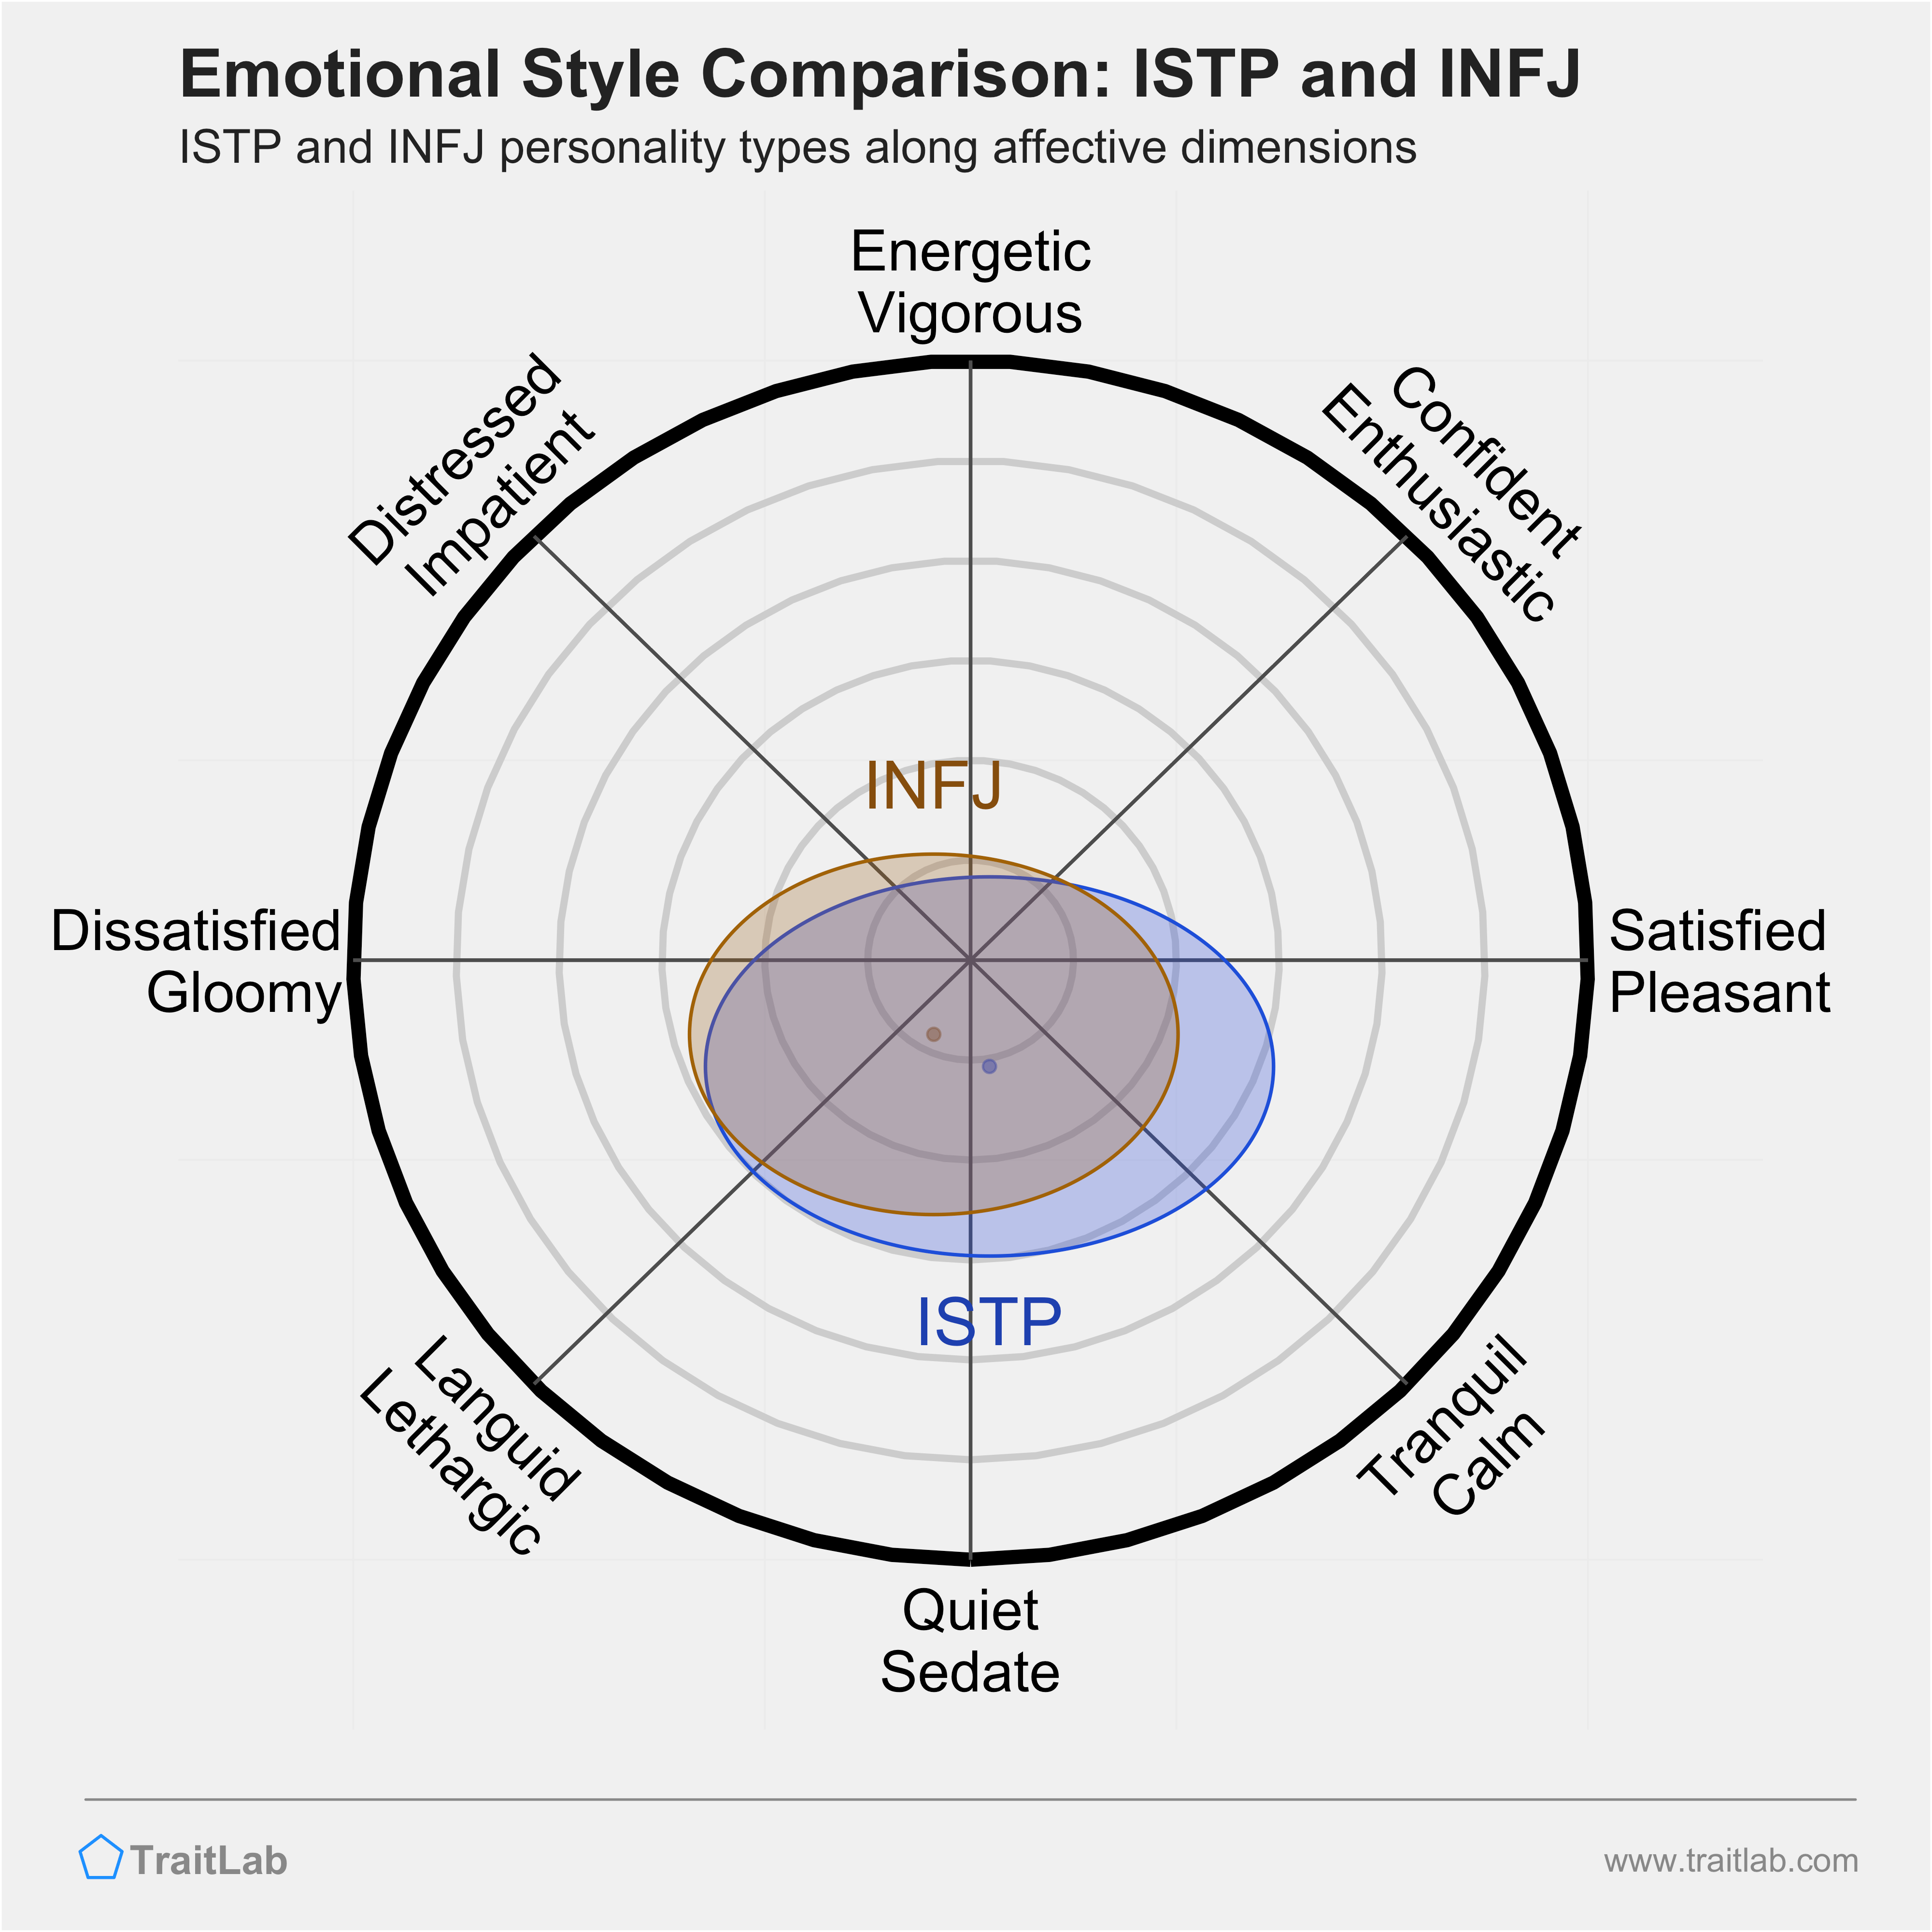 ISTP and INFJ comparison across emotional (affective) dimensions